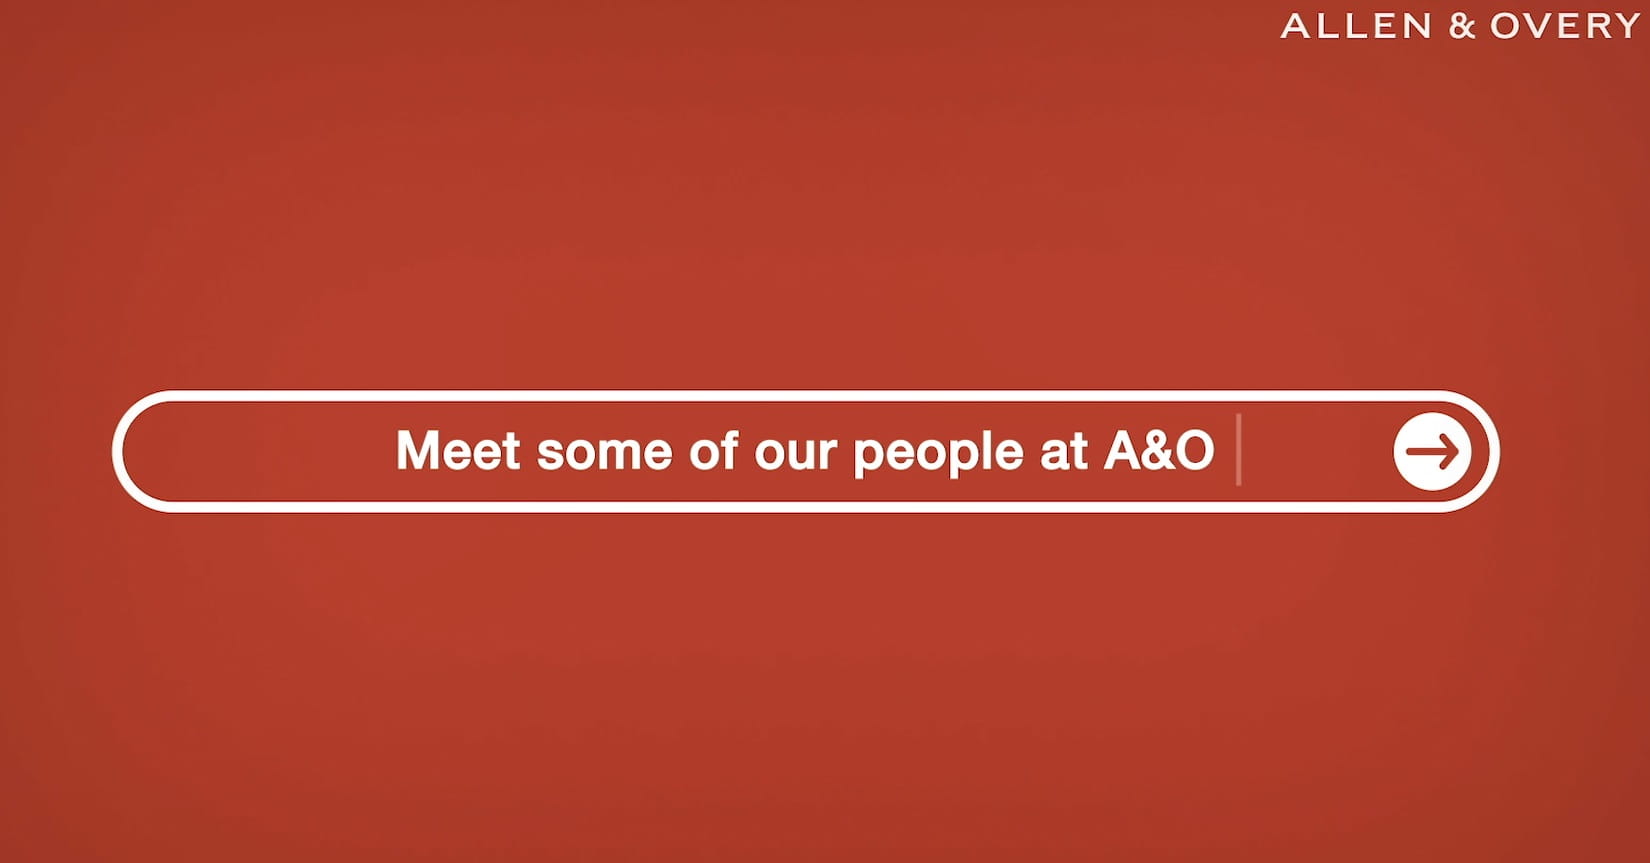 Meet some of our people at A&O typed in a search bar